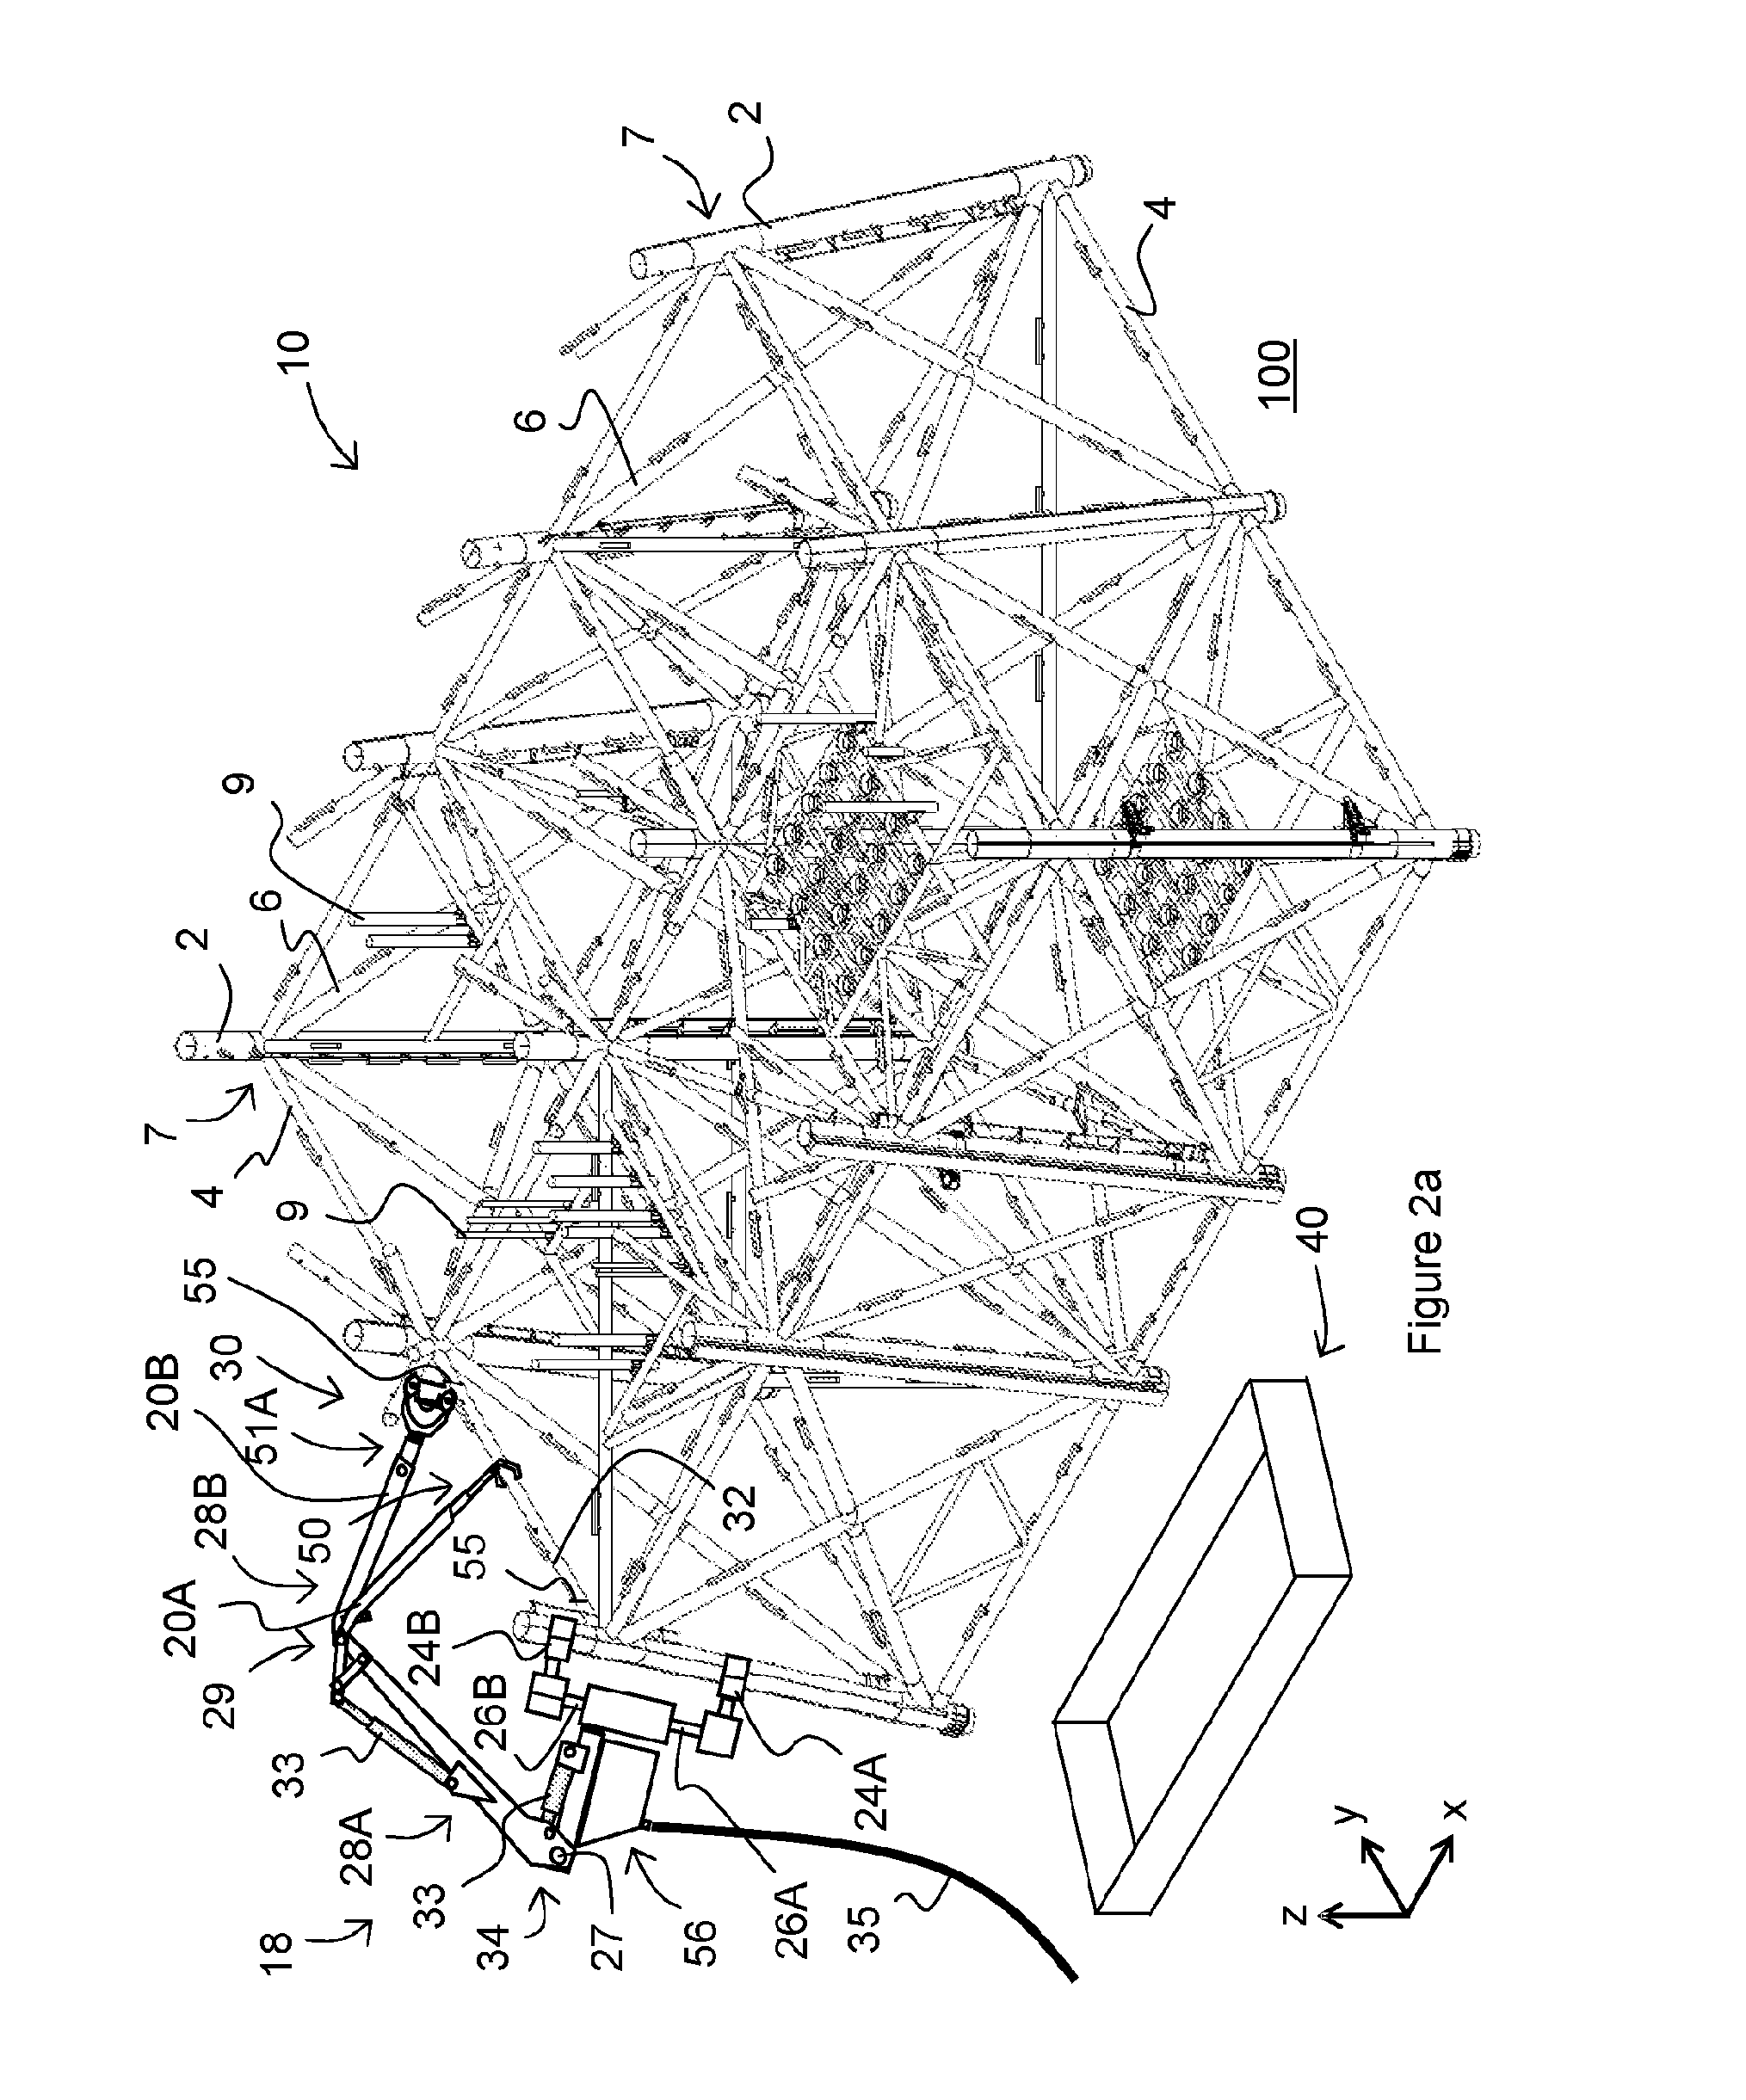 Method and device for assembling or disassembling a structure under water